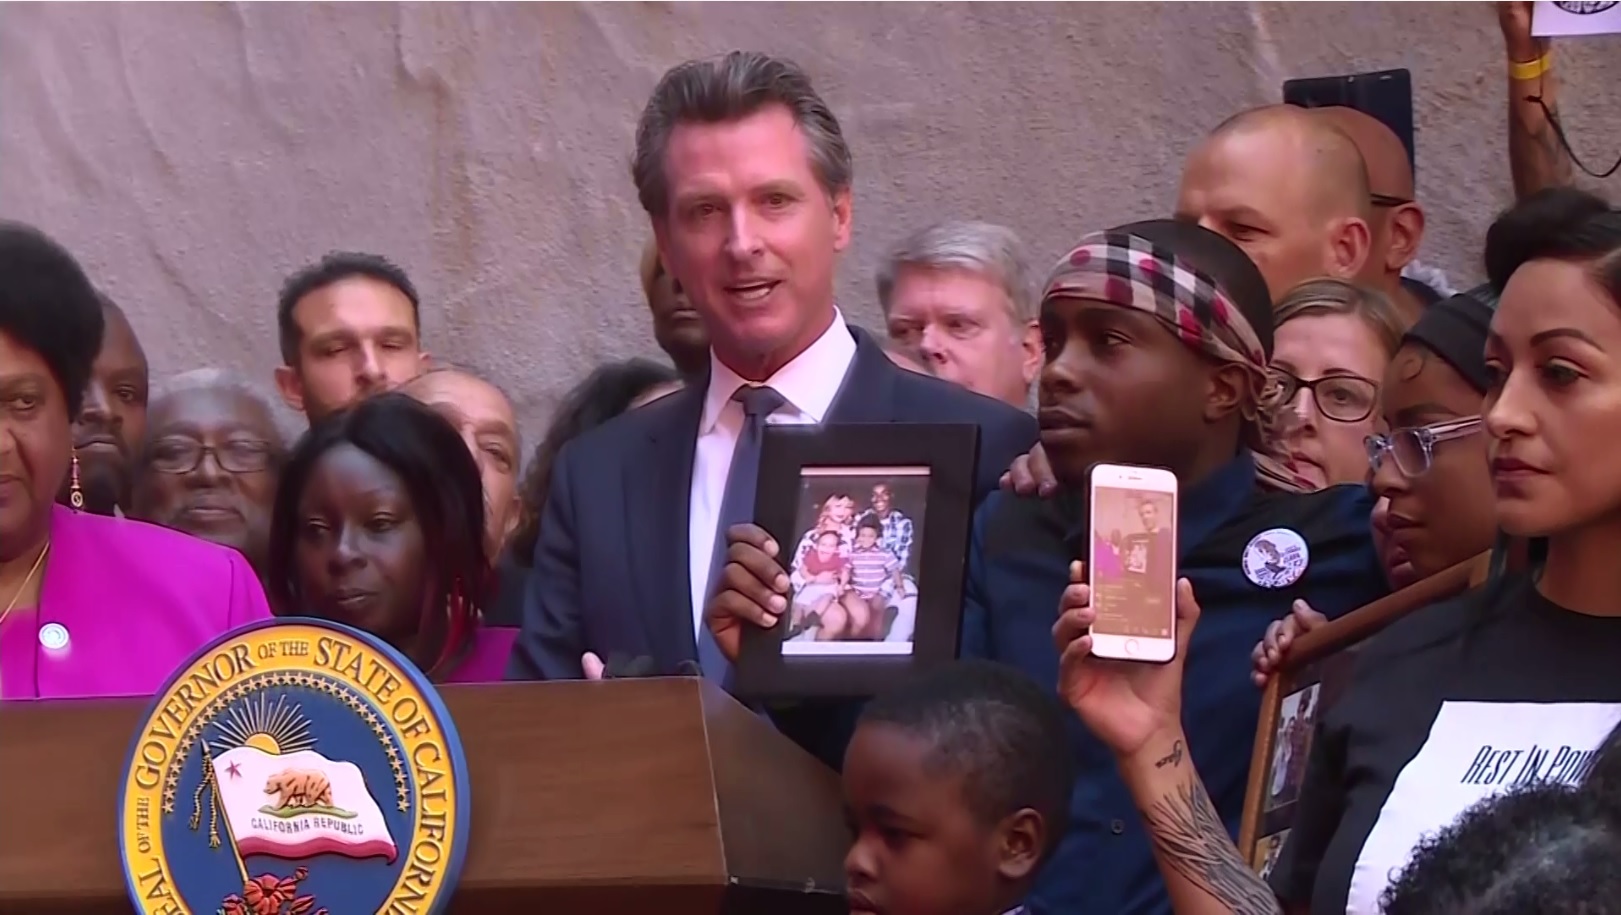 Surrounded by relatives of people killed in police shootings, Gov. Gavin Newsom signed AB392 at a ceremony in Sacramento on August 19, 2019. (CBS)